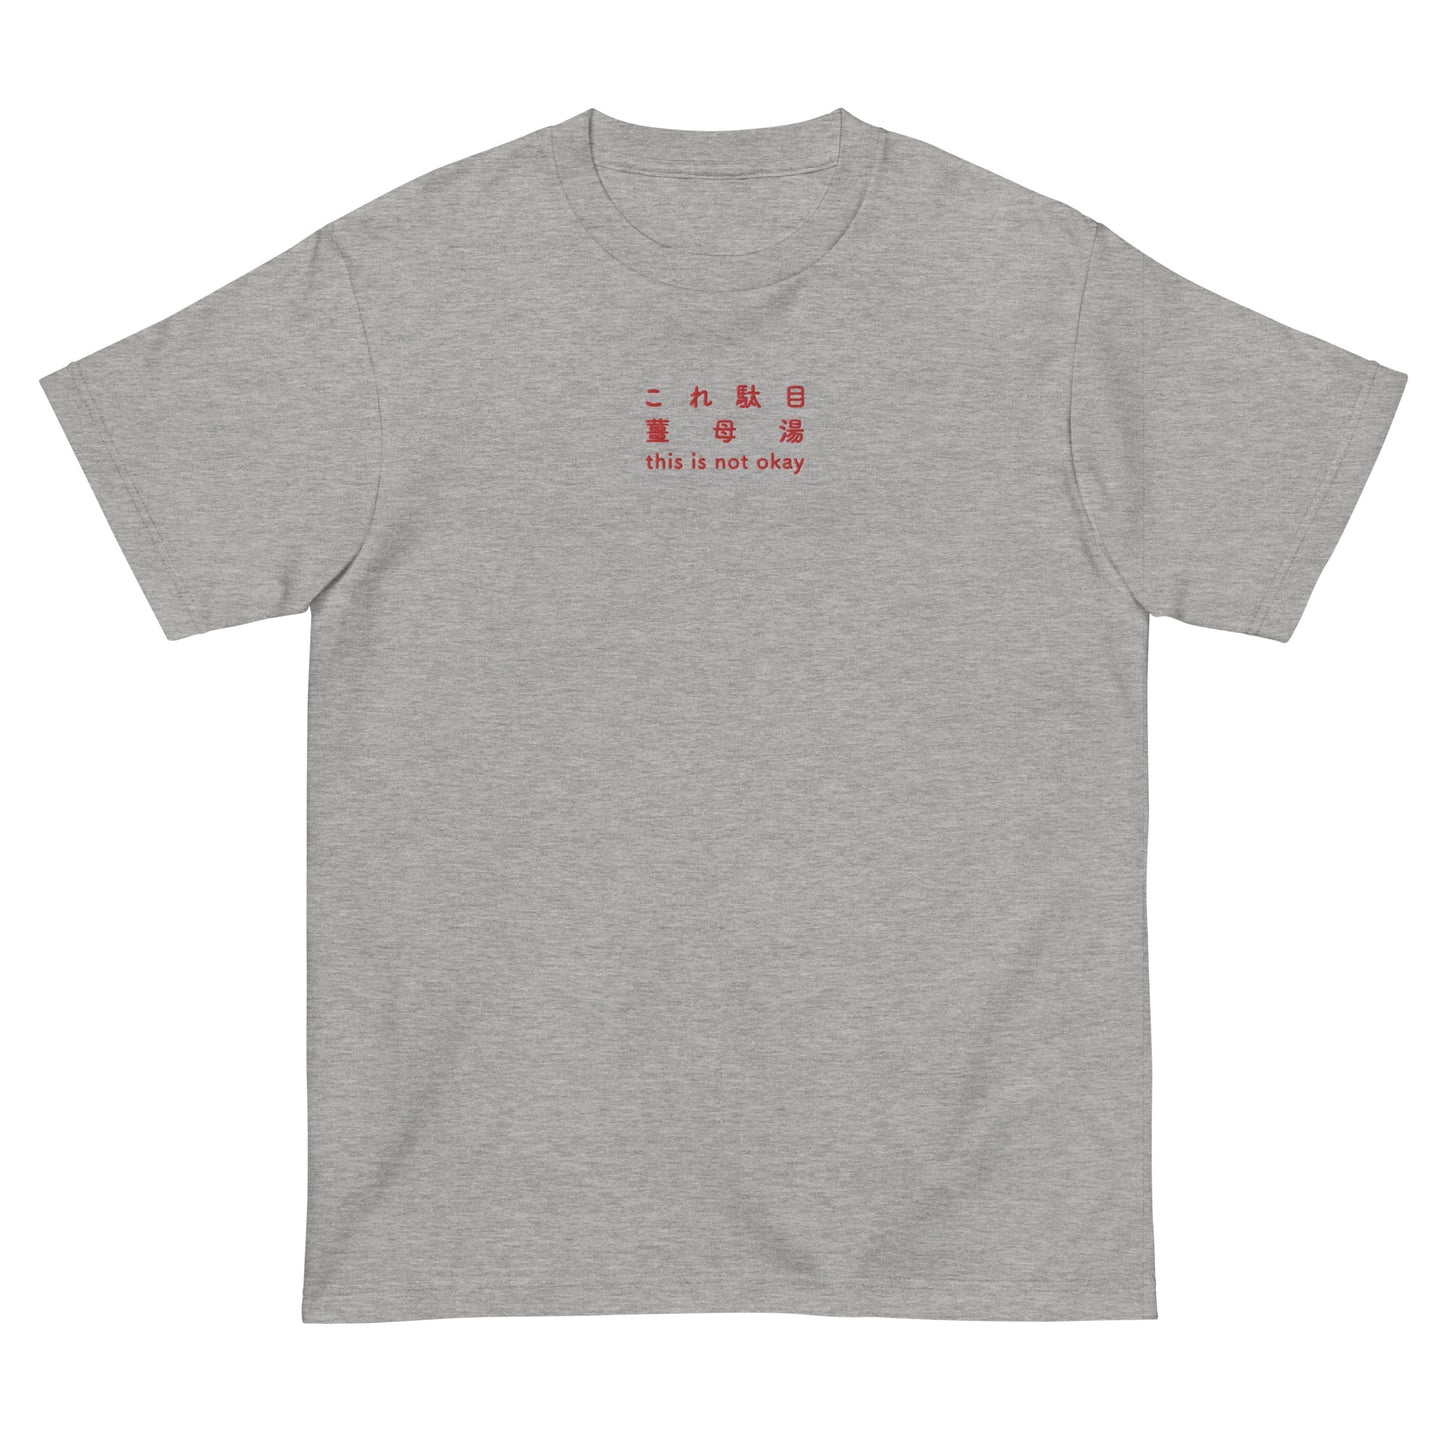 Light Gray High Quality Tee - Front Design with an Red Embroidery "This Is Not Okay" in Japanese,Chinese and English